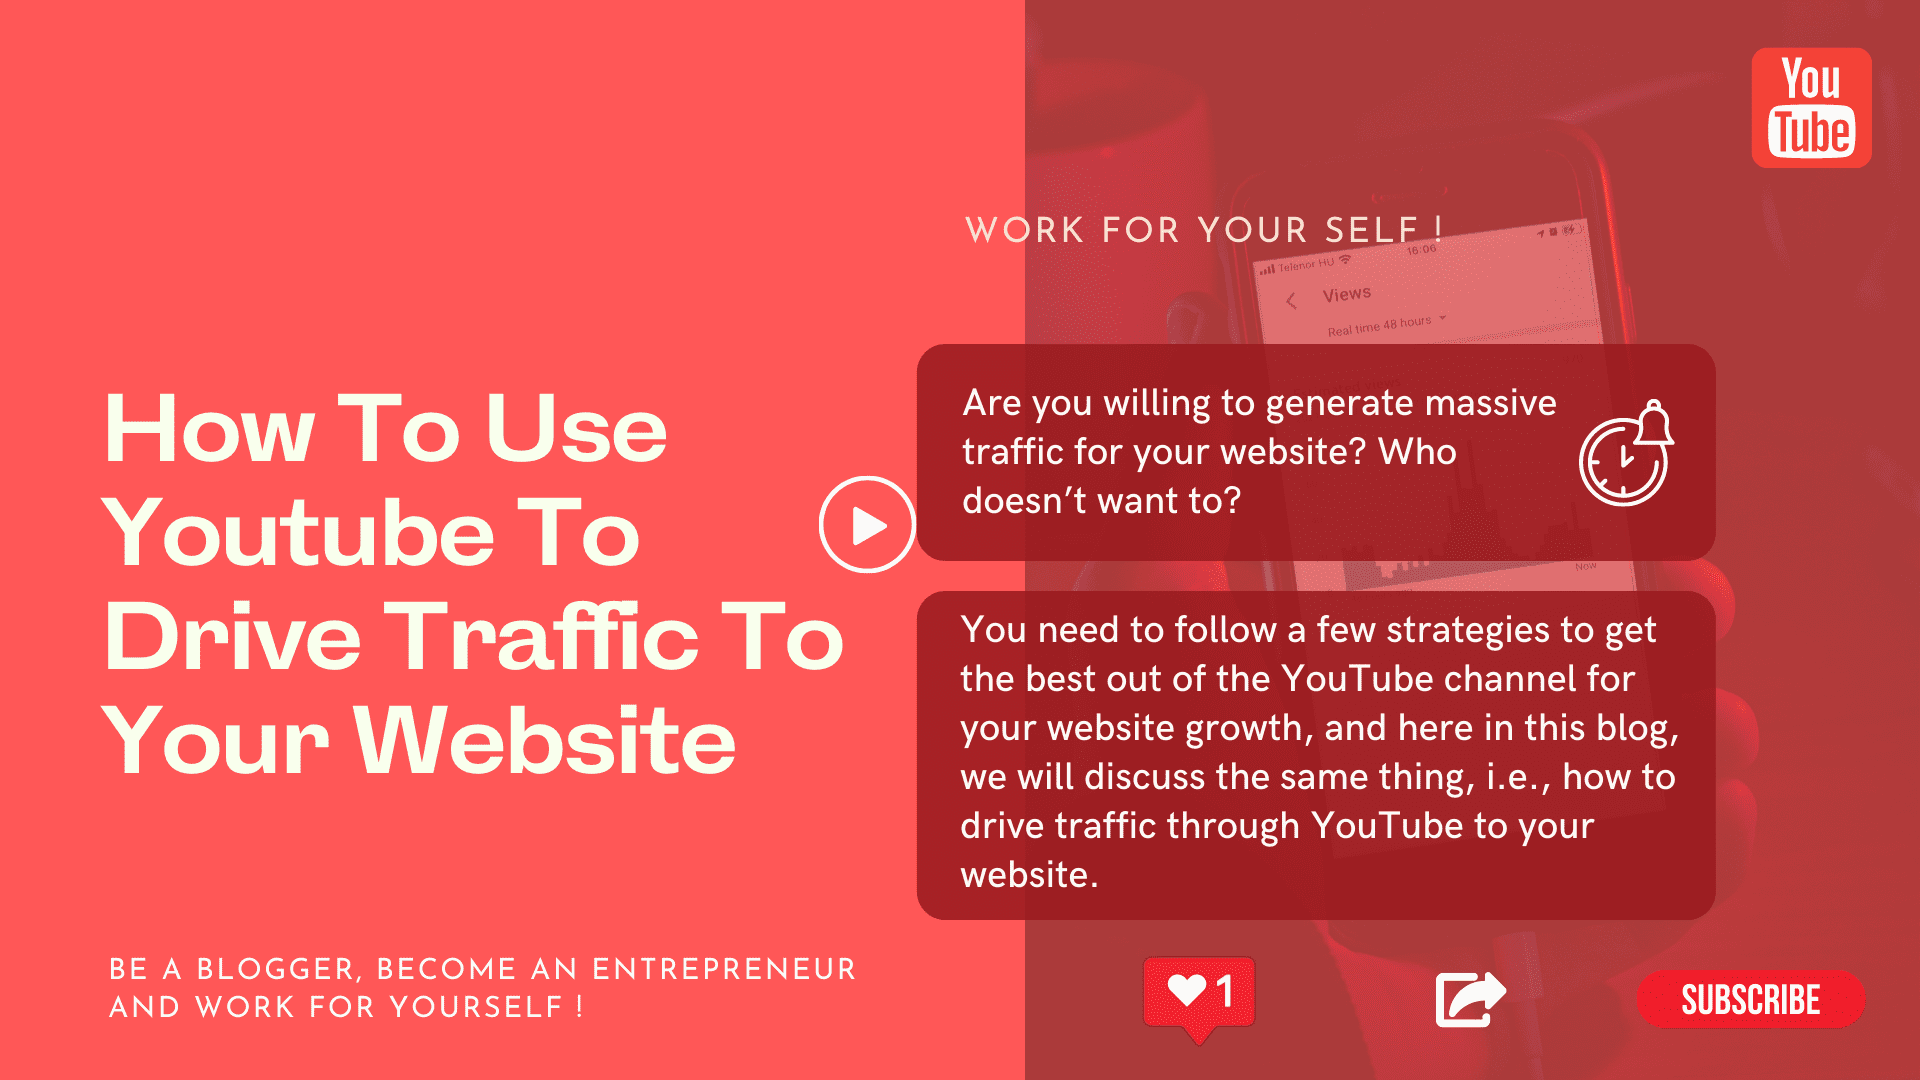 use-youtube-to-drive-traffic-to-your-website-mssaro